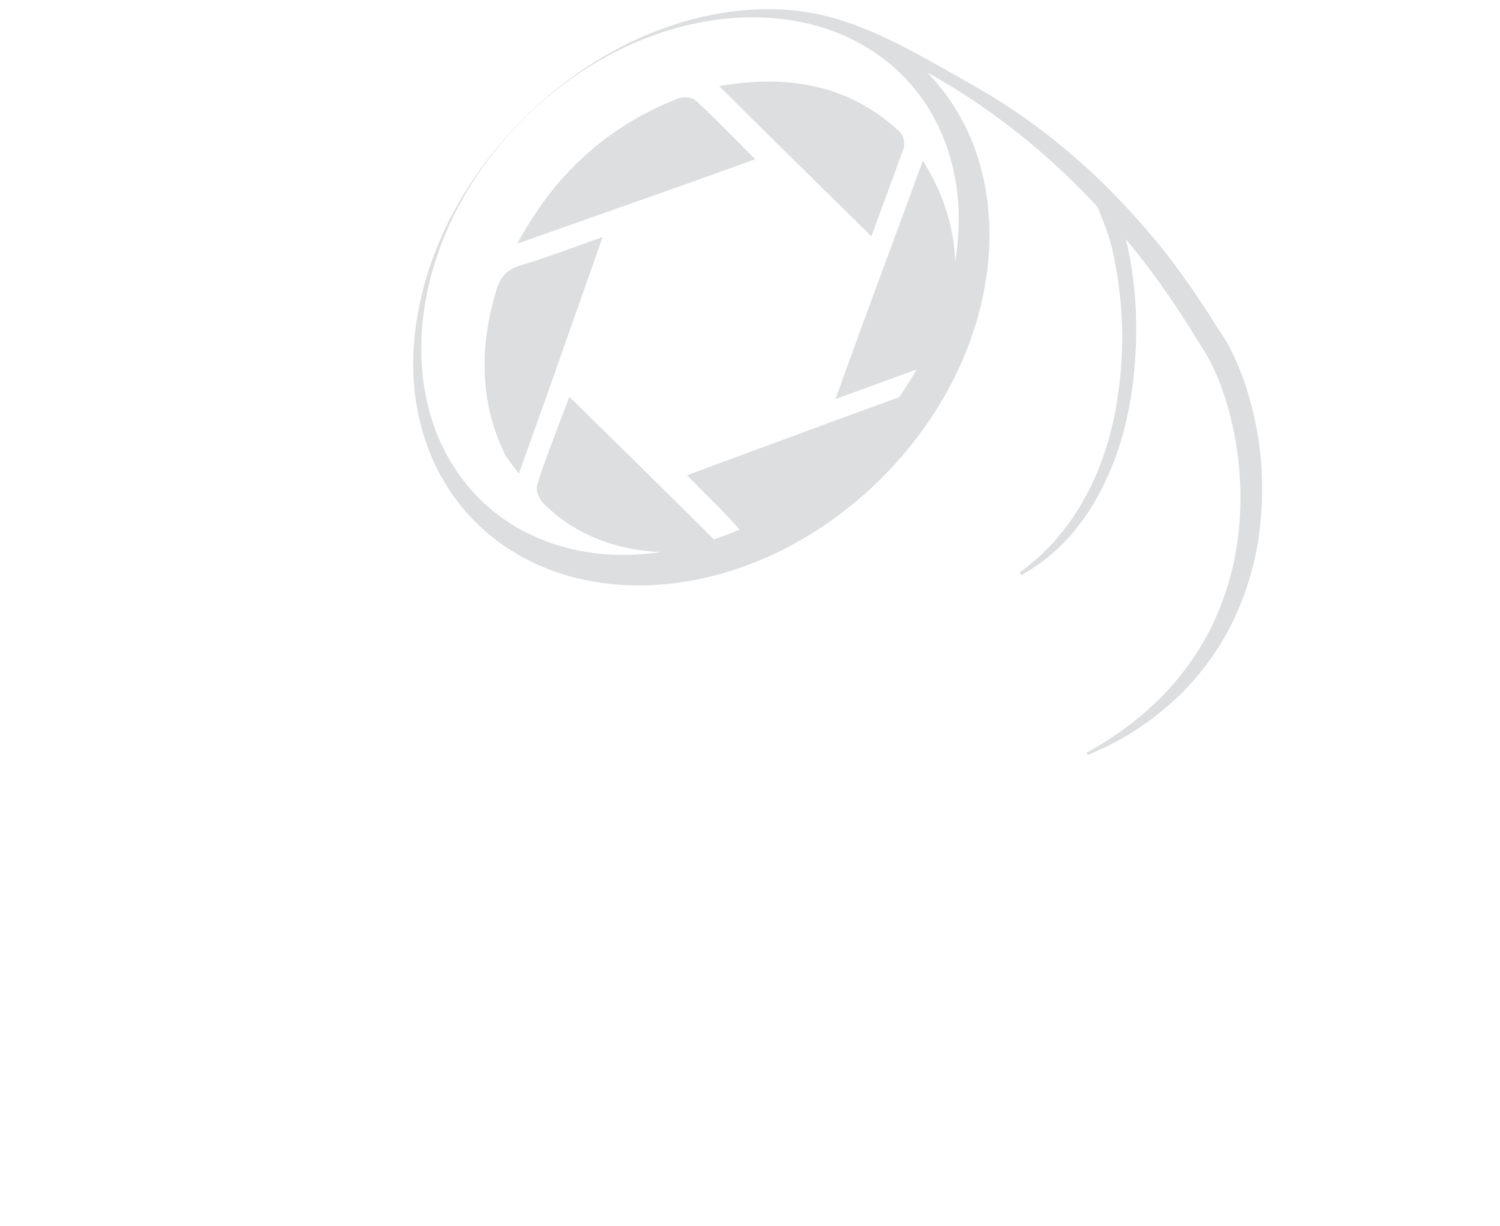 Cana Project